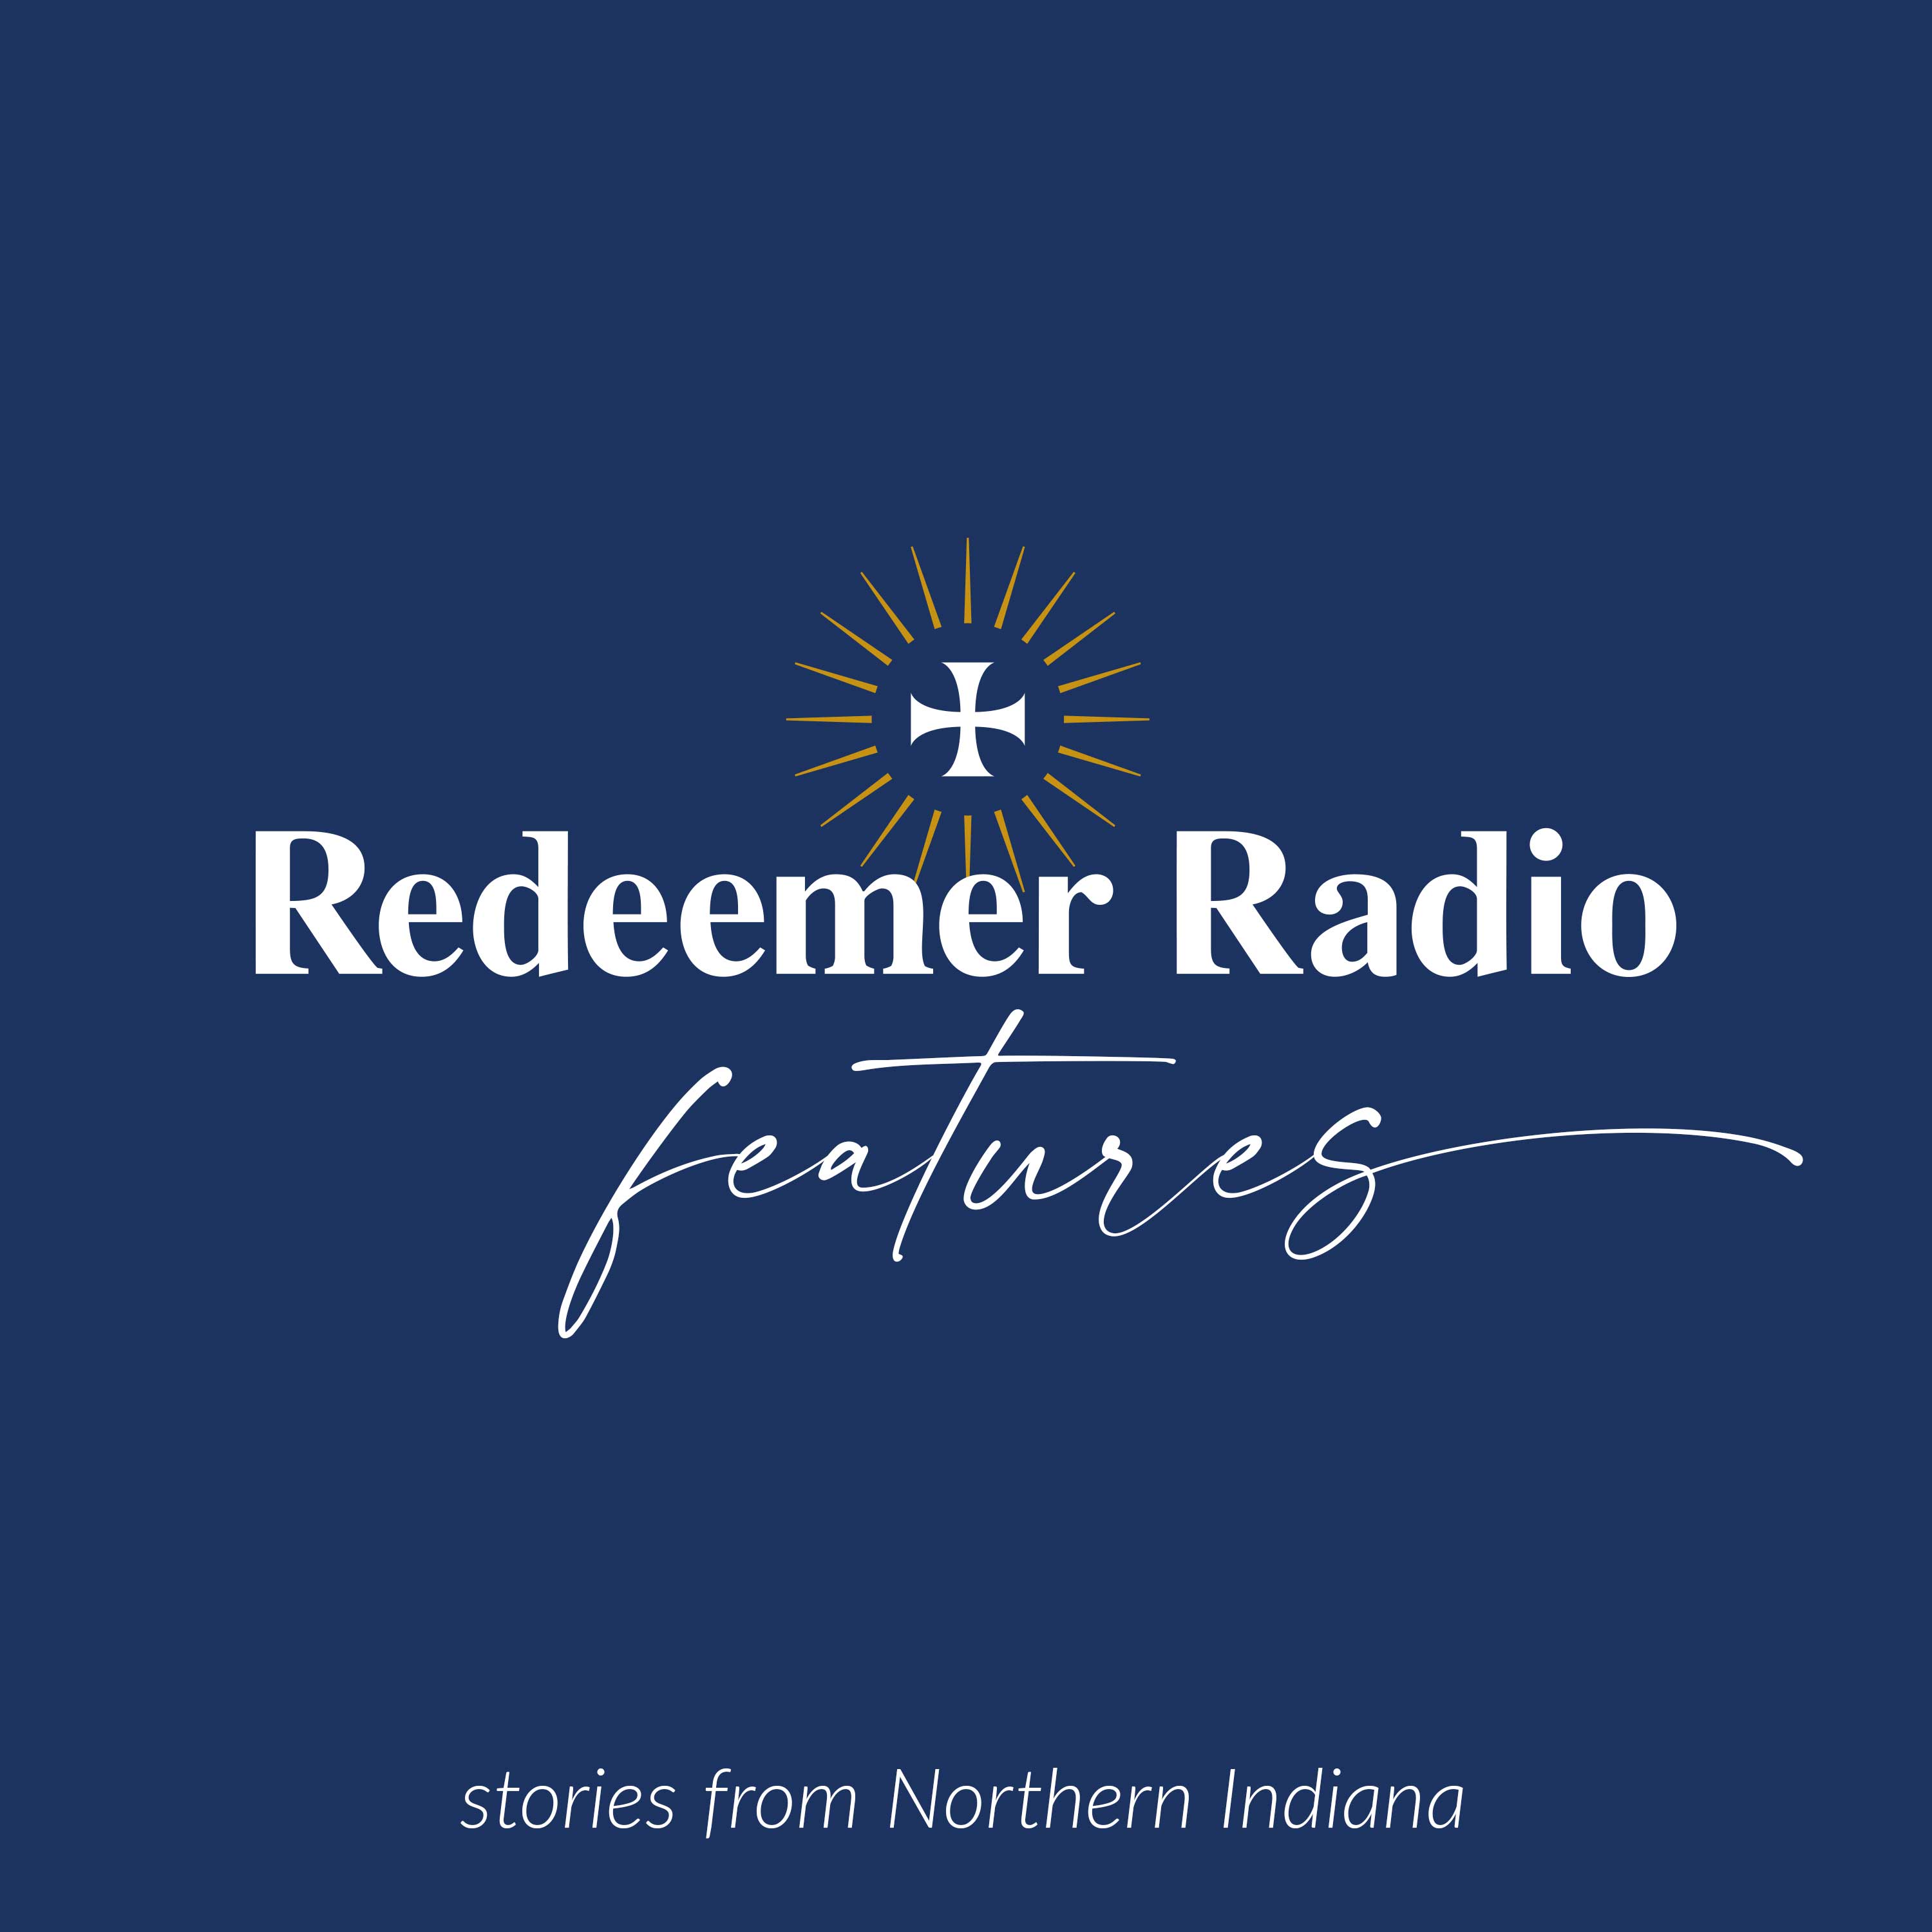 Artwork for Redeemer Radio Features